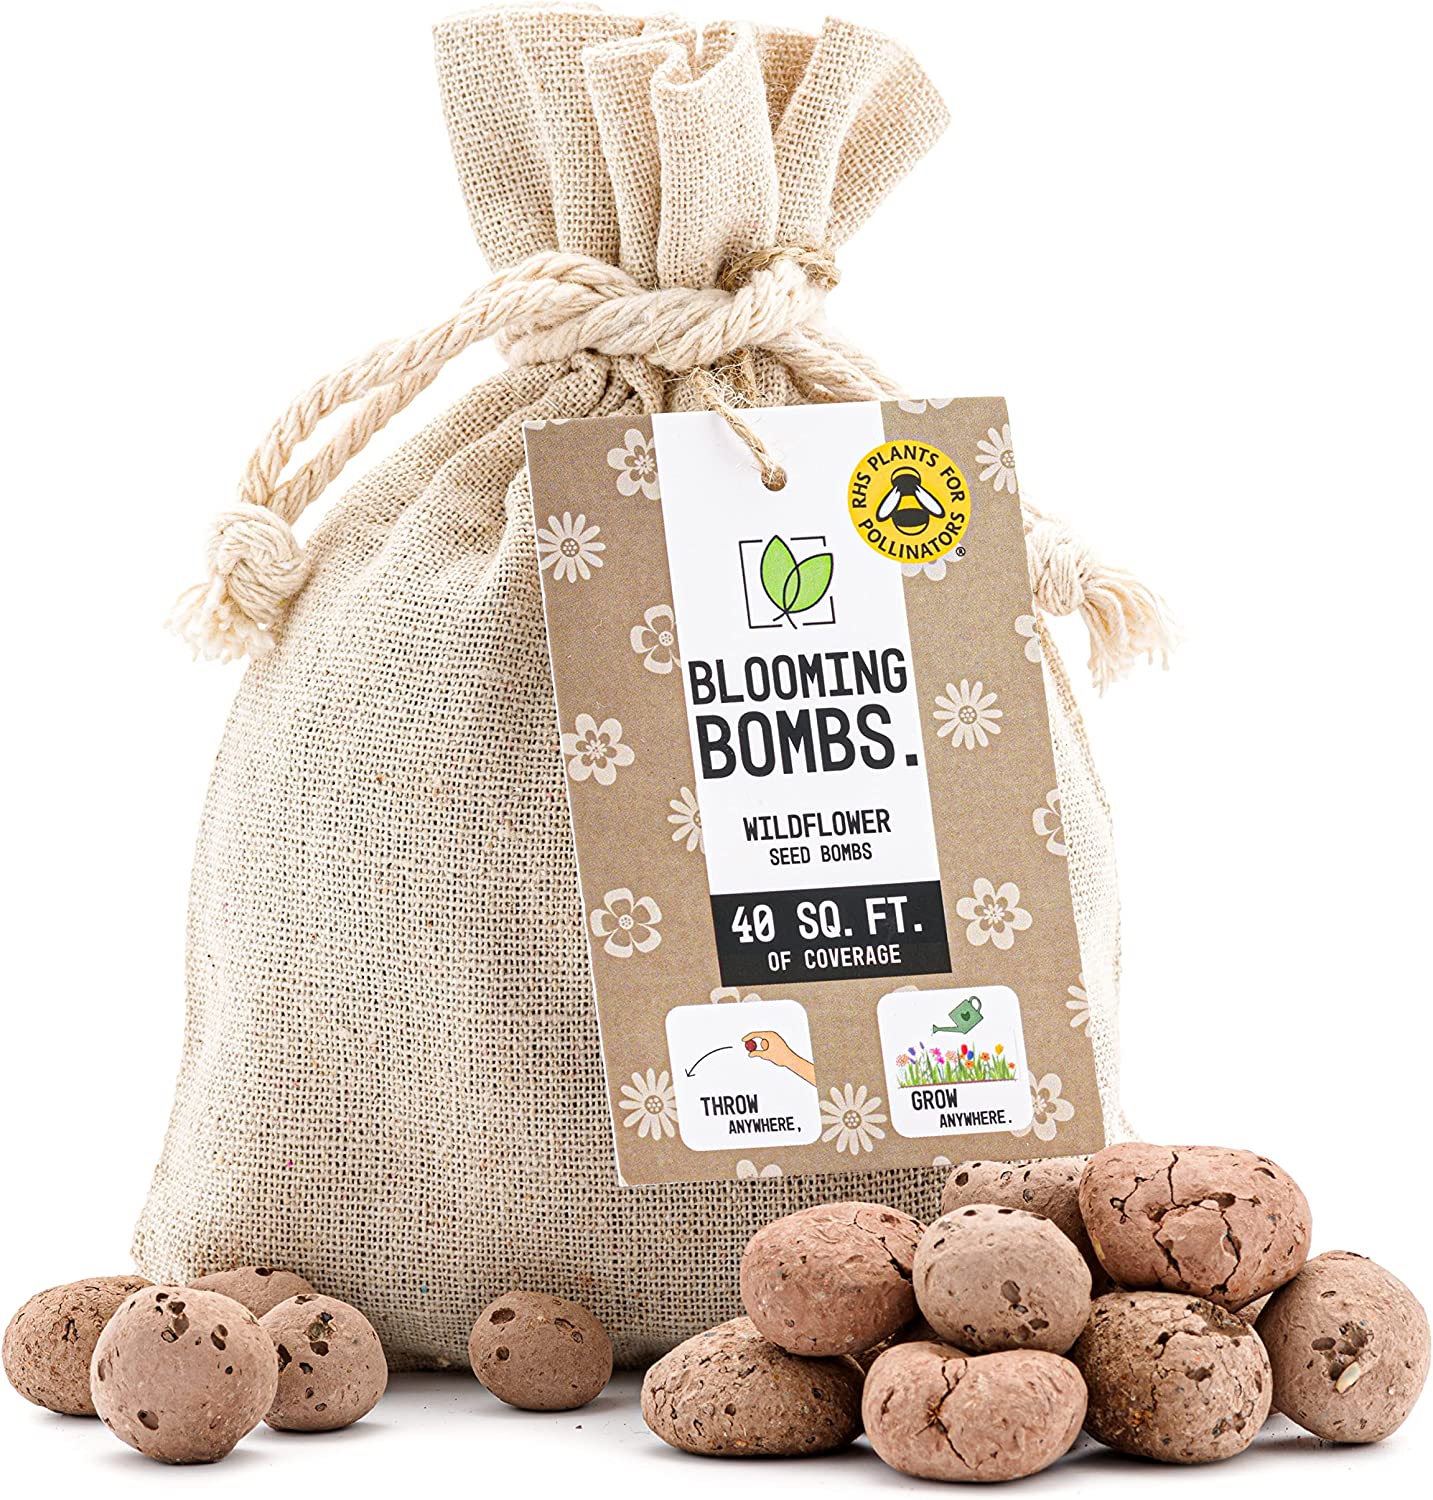 Blooming Bombs Small - 125g - Ball Shaped Wildflower Seed Bombs | Bee Friendly Wildflower Seed Mix | Made in The UK